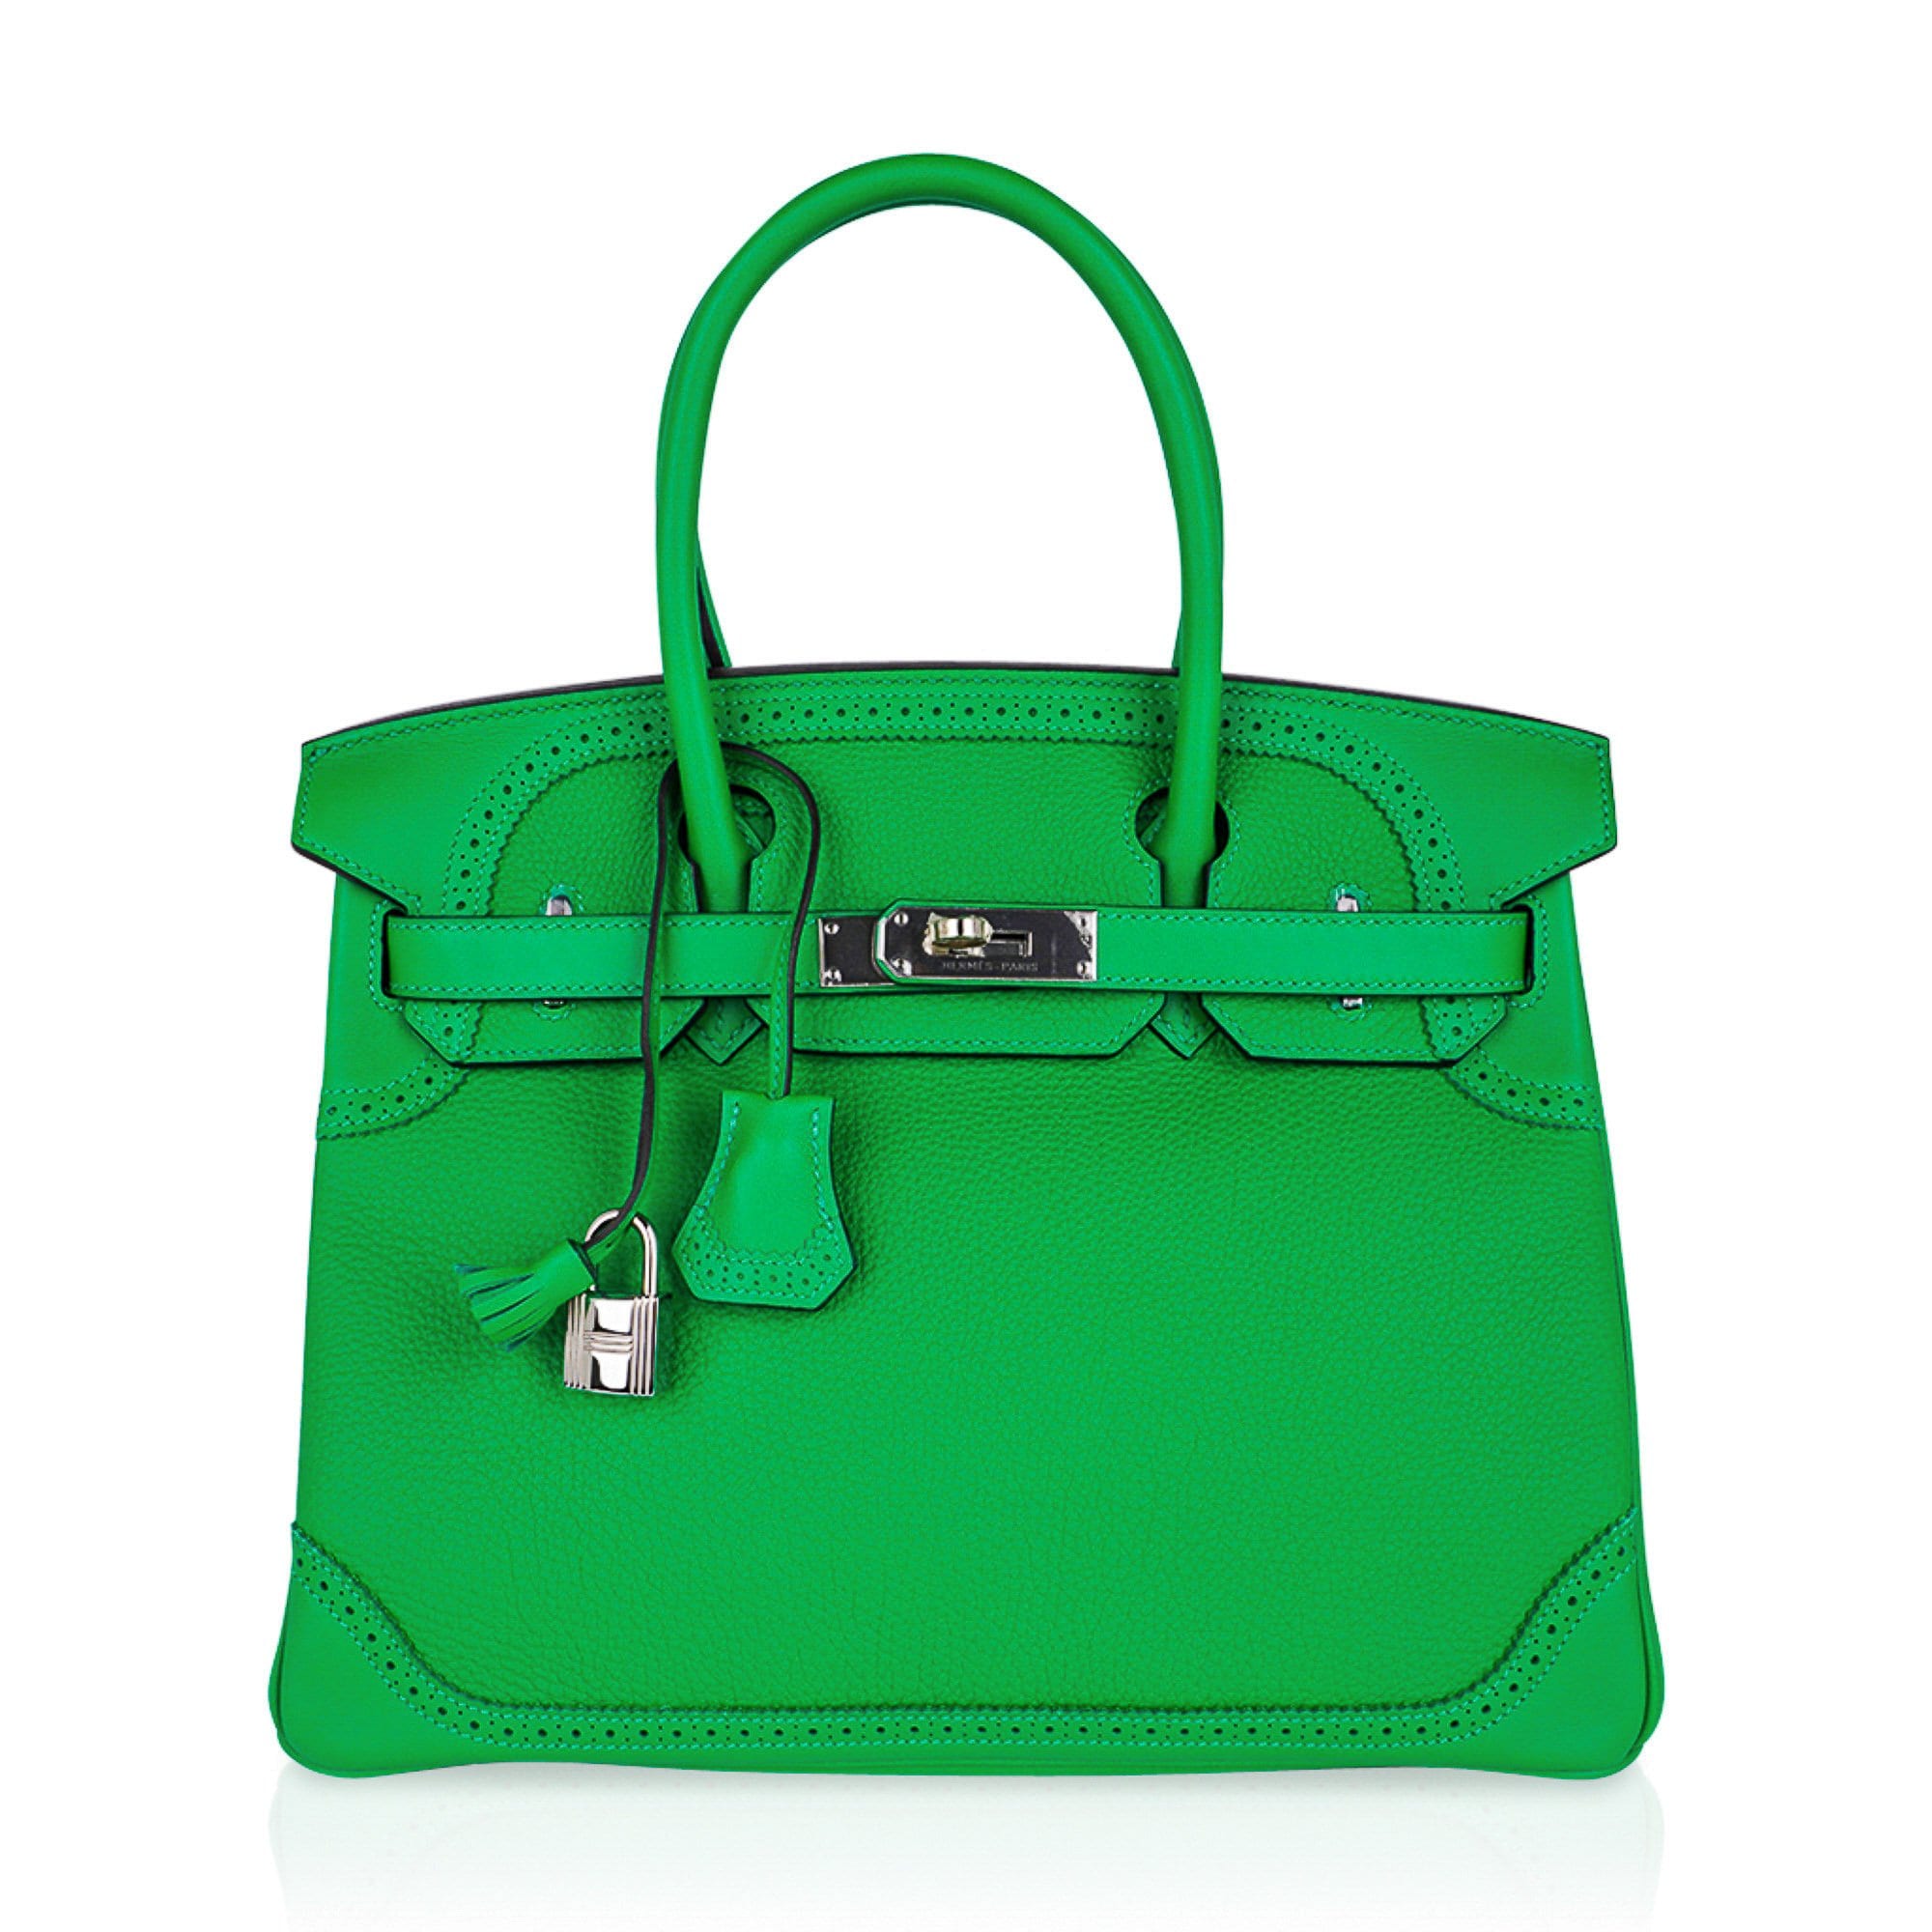 Hermes Limited Edition Birkin Ghillies 30 in Bamboo Auction